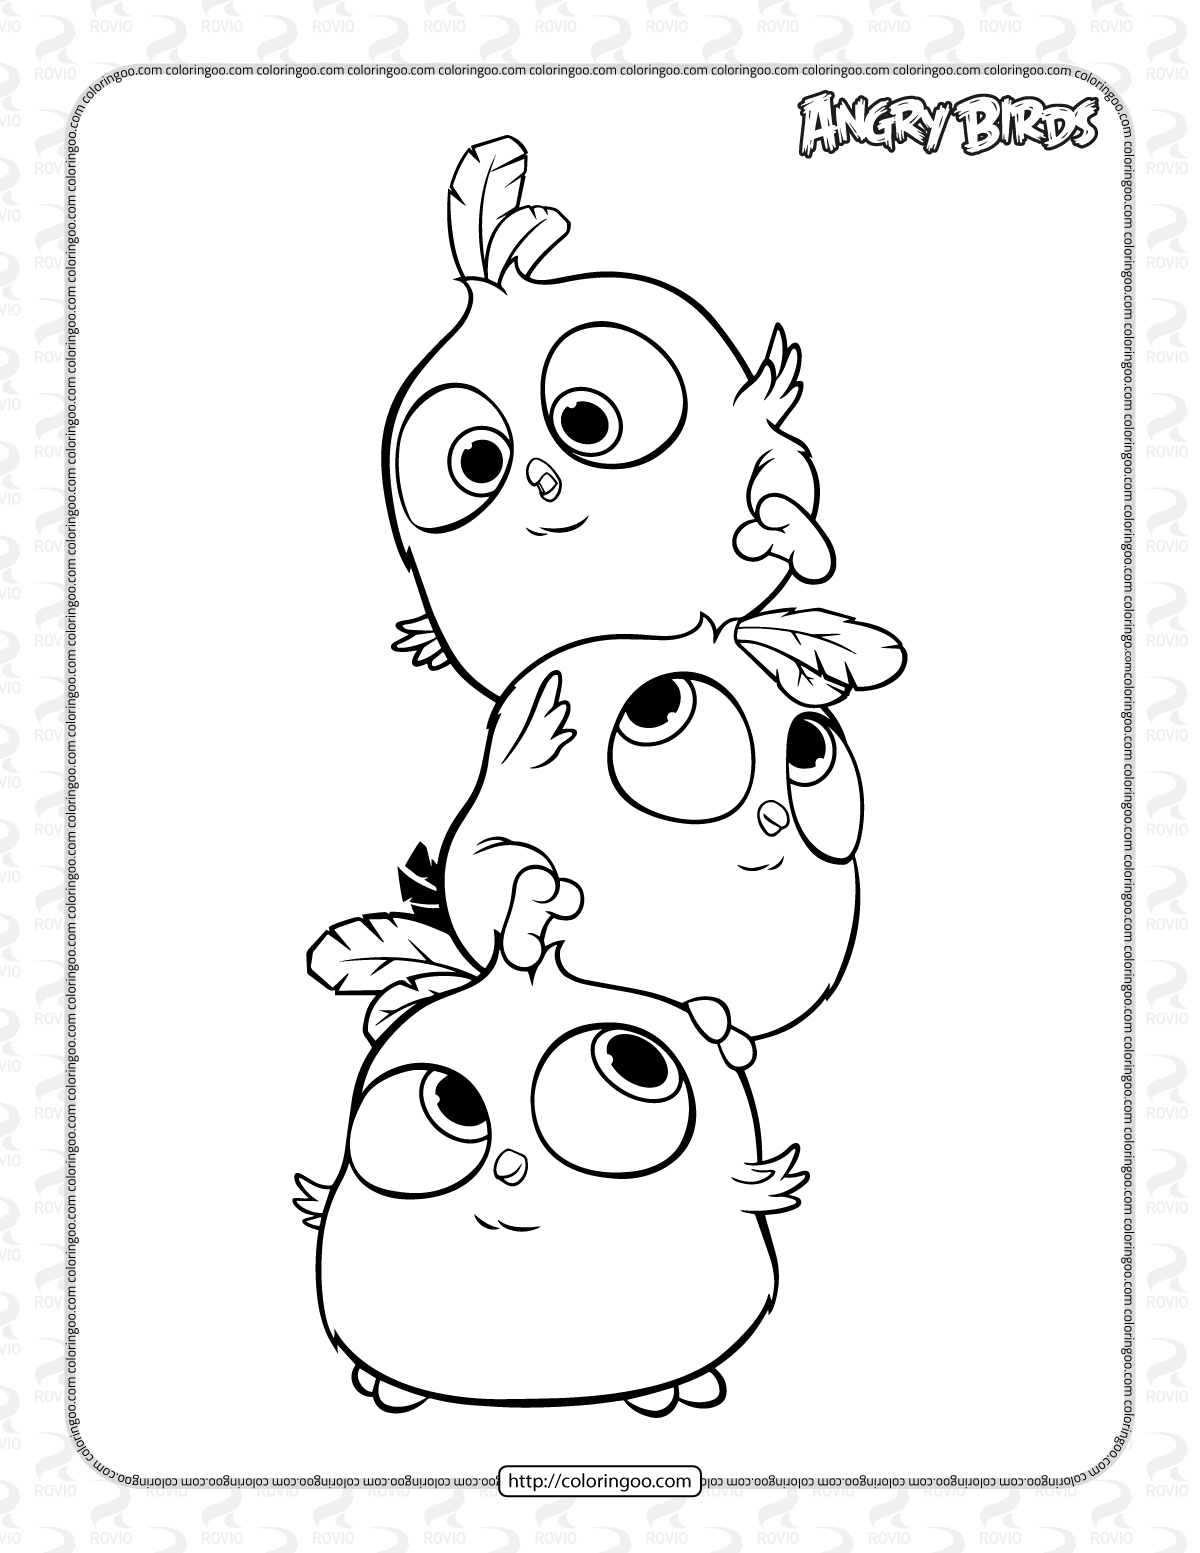 blue birds jay jake and jim coloring page